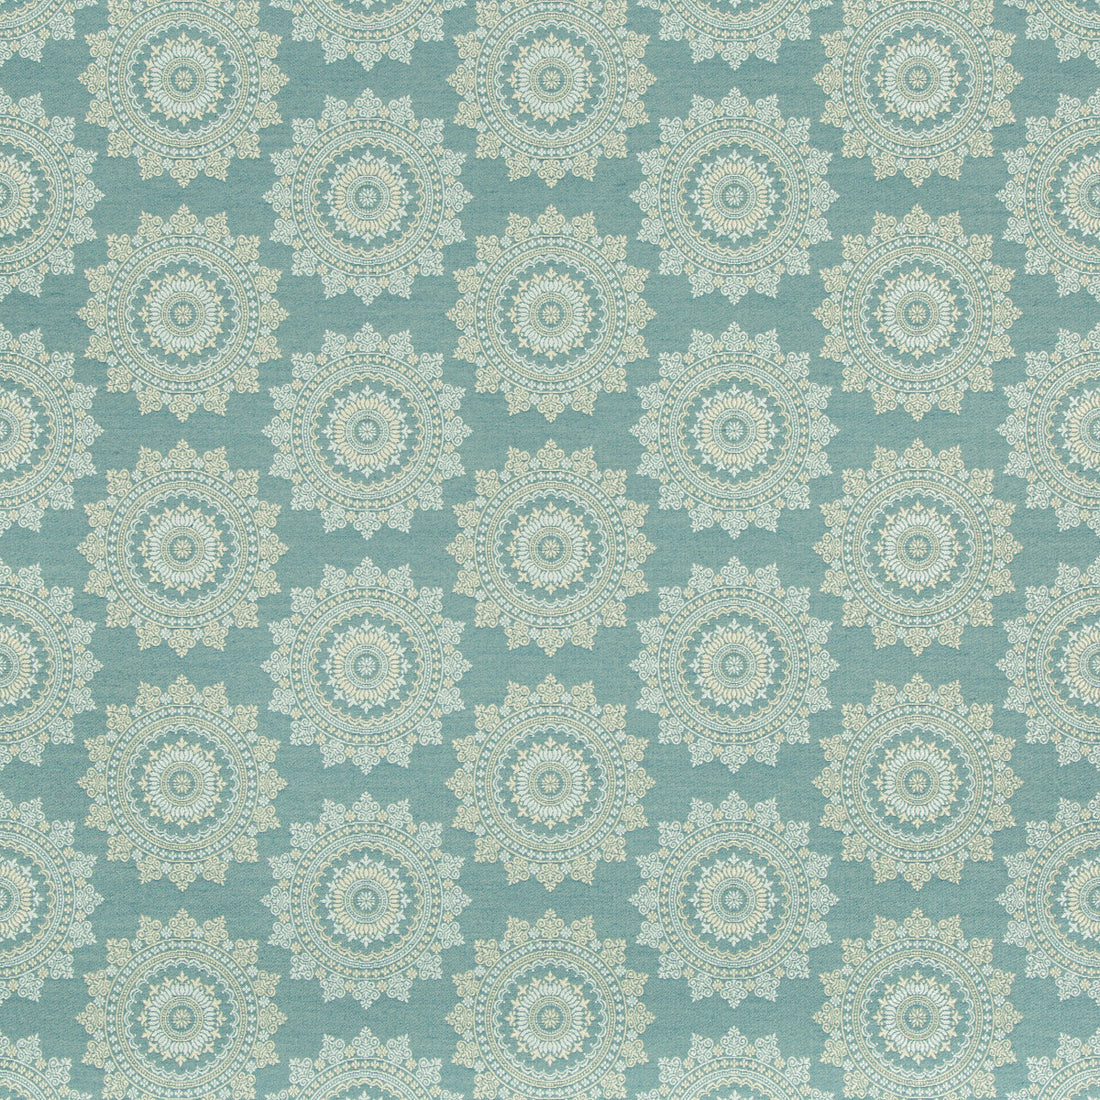 Piatto fabric in sea green color - pattern 35865.35.0 - by Kravet Contract in the Gis Crypton Green collection